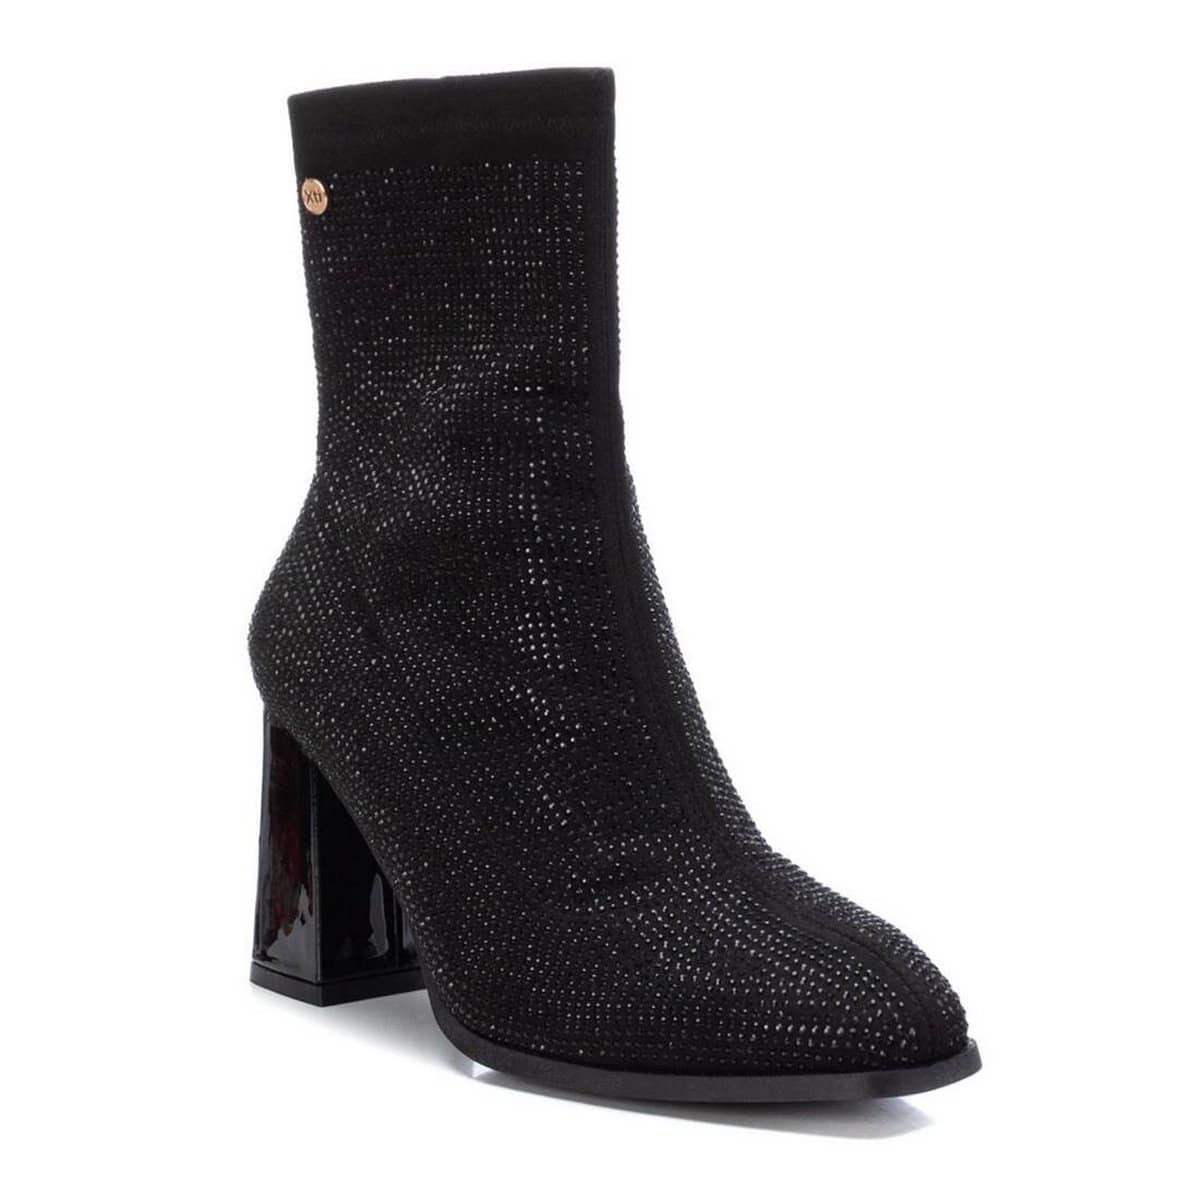 VEGAN SUEDE HEELED BOOTS WITH STRASS 142047 XTI BLACK